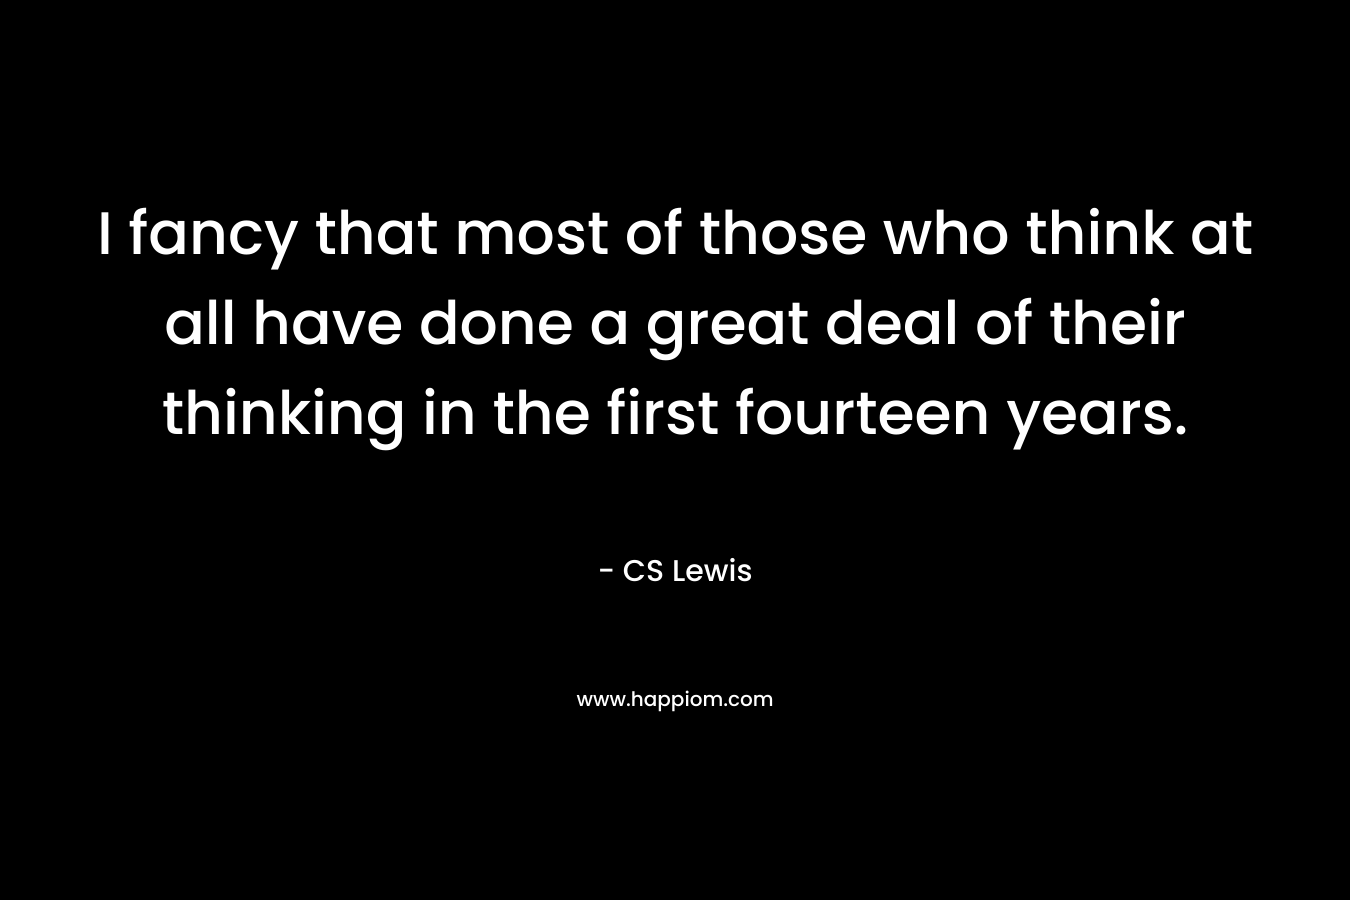 I fancy that most of those who think at all have done a great deal of their thinking in the first fourteen years.